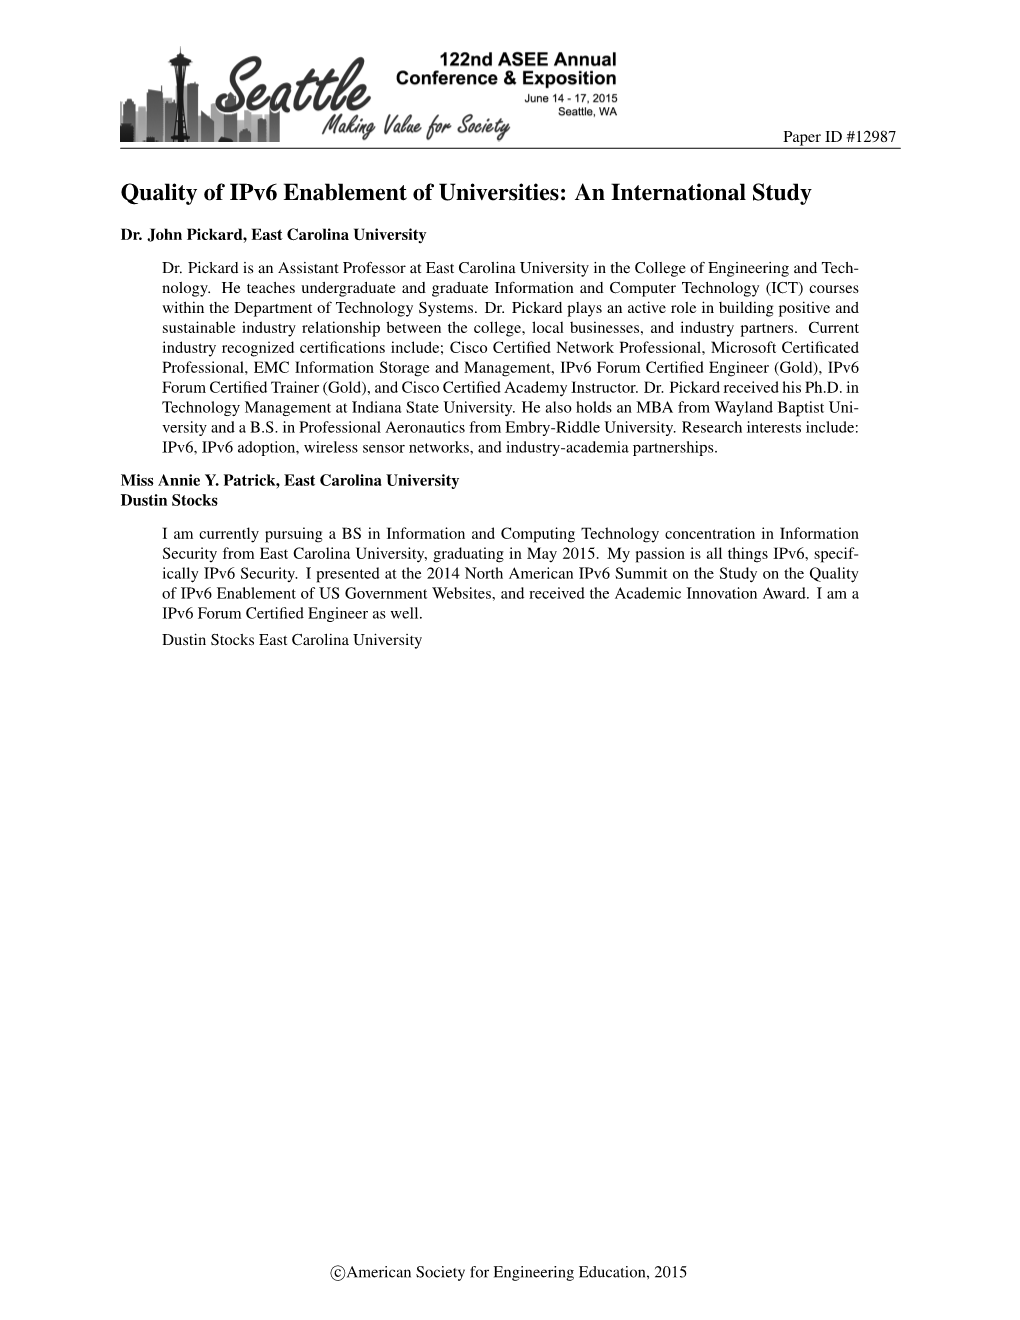 Quality of Ipv6 Enablement of Universities: an International Study